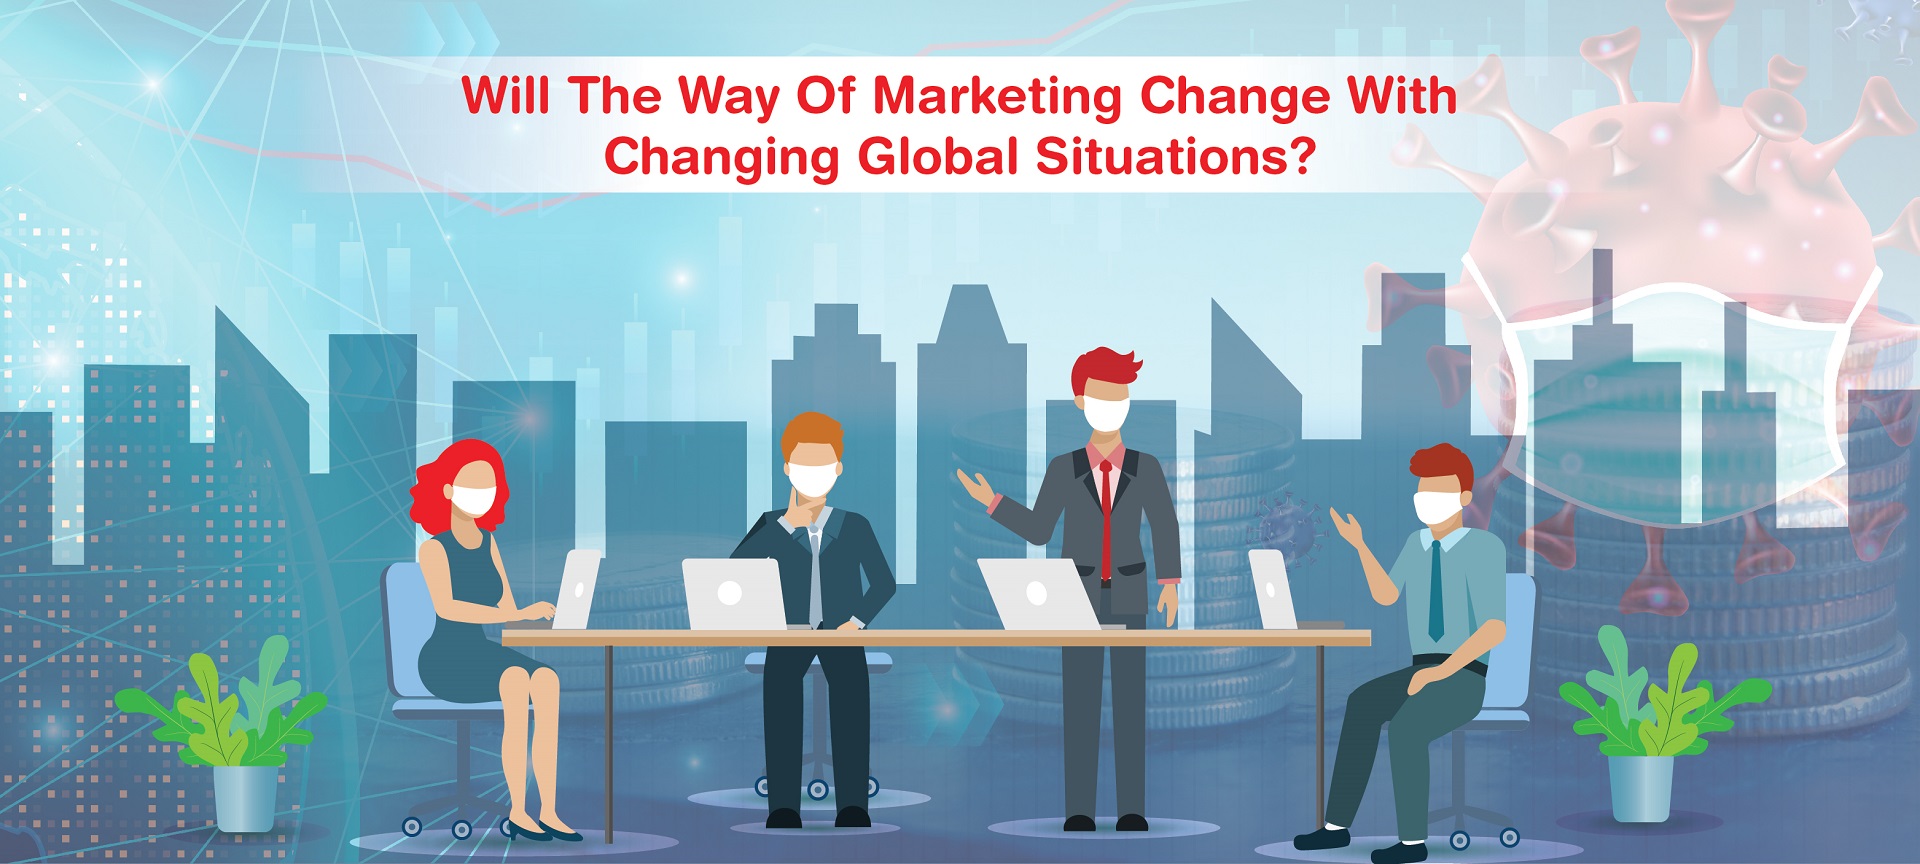 Will the Way of Marketing Change With Changing Global Situations?